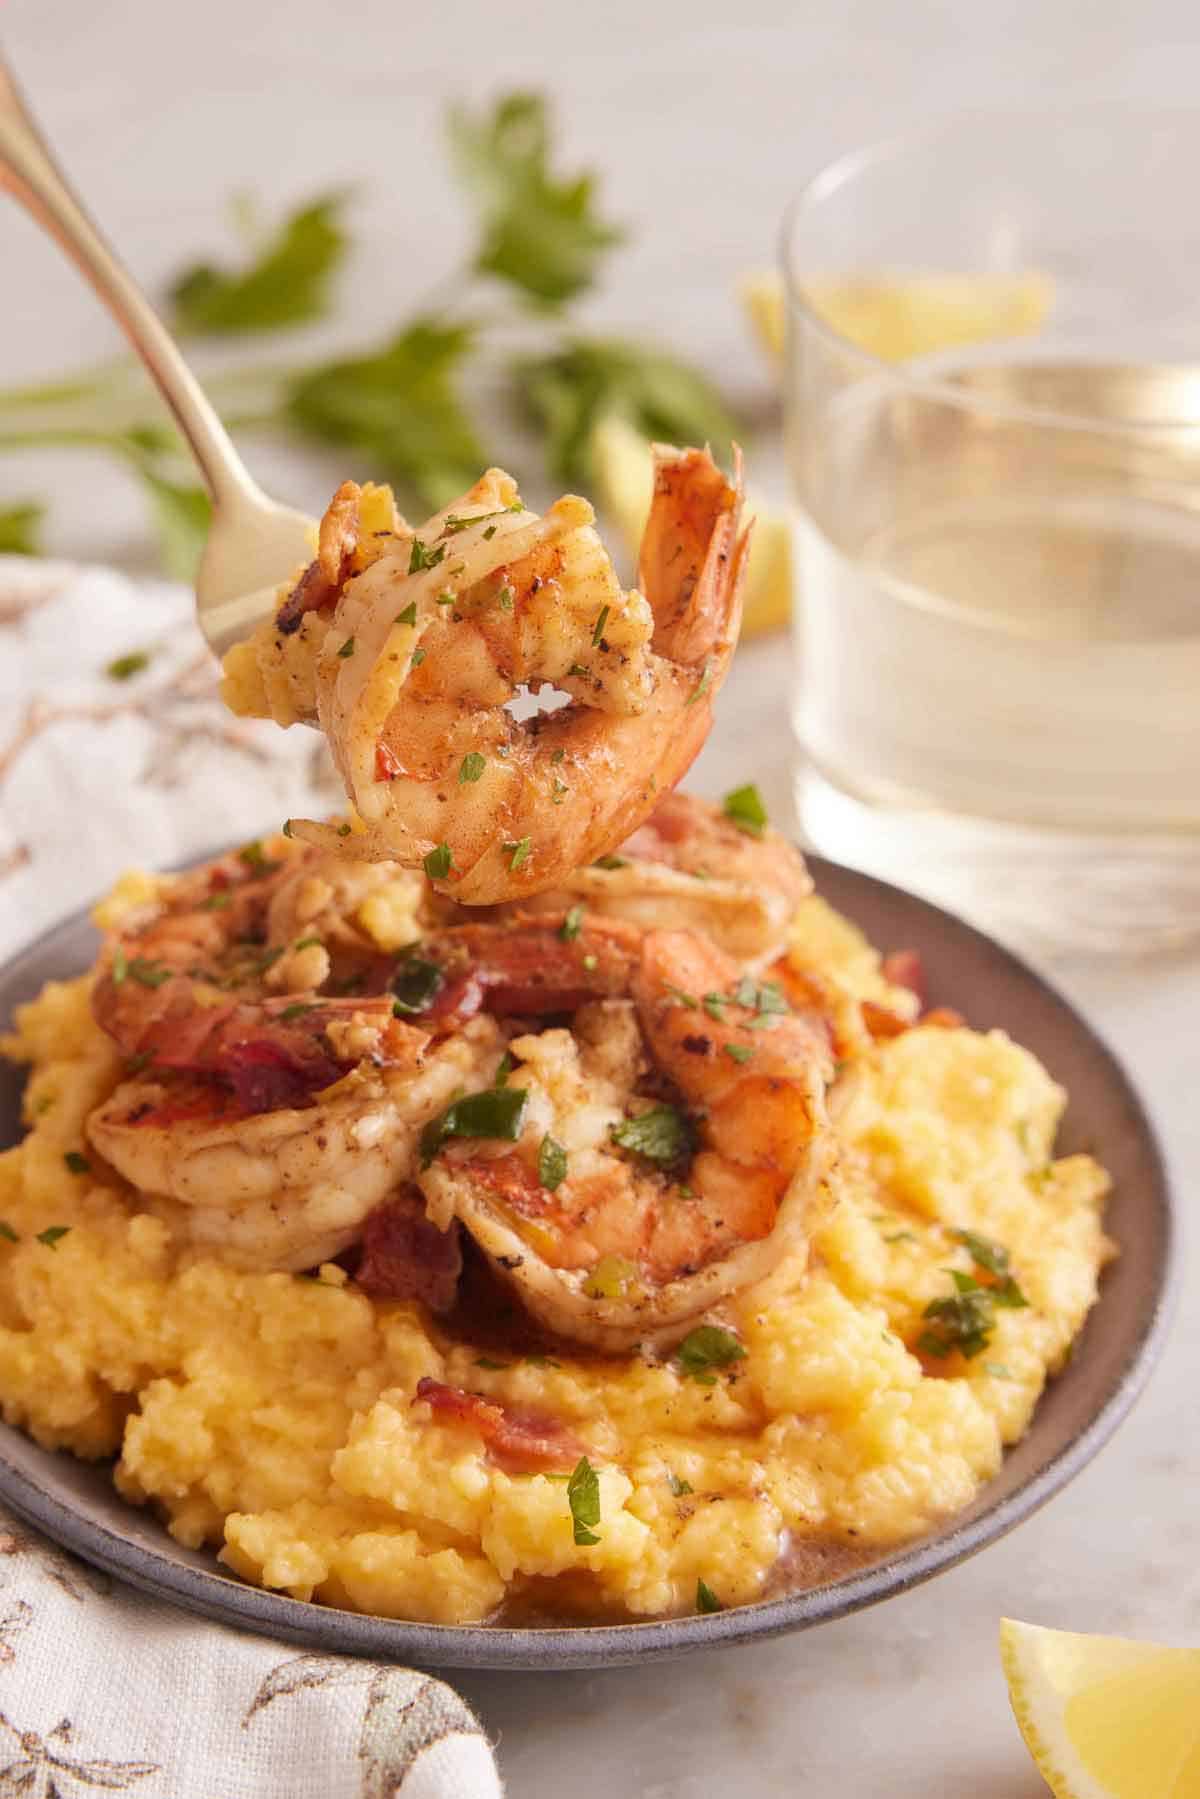 A forkful of shrimp and grits lifted from a bowl with a glass of wine in the background.